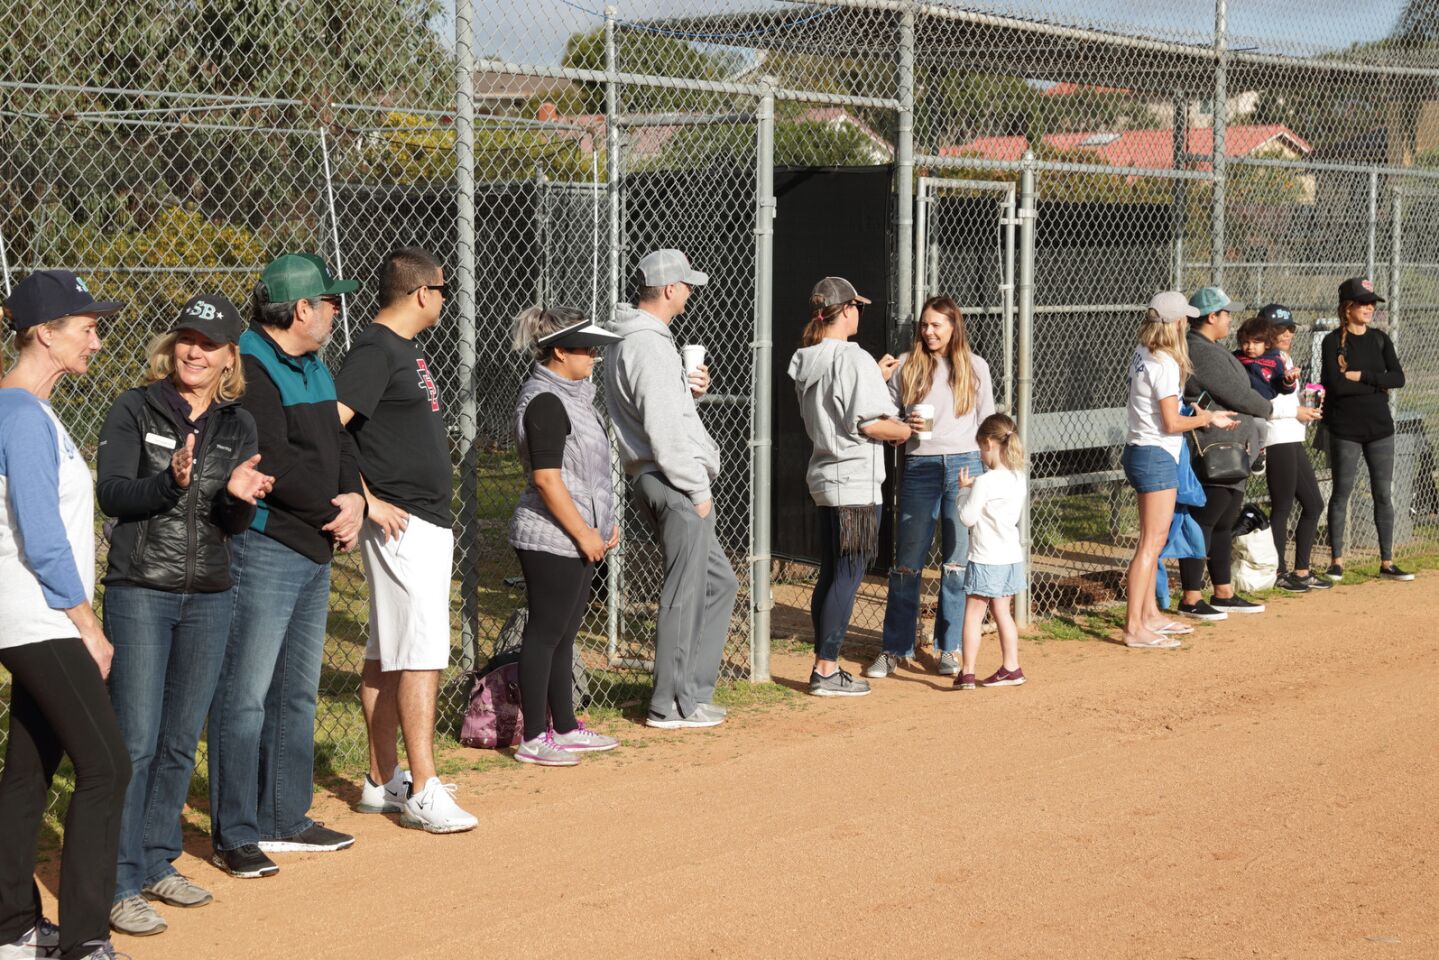 Parents watch the parade of teams